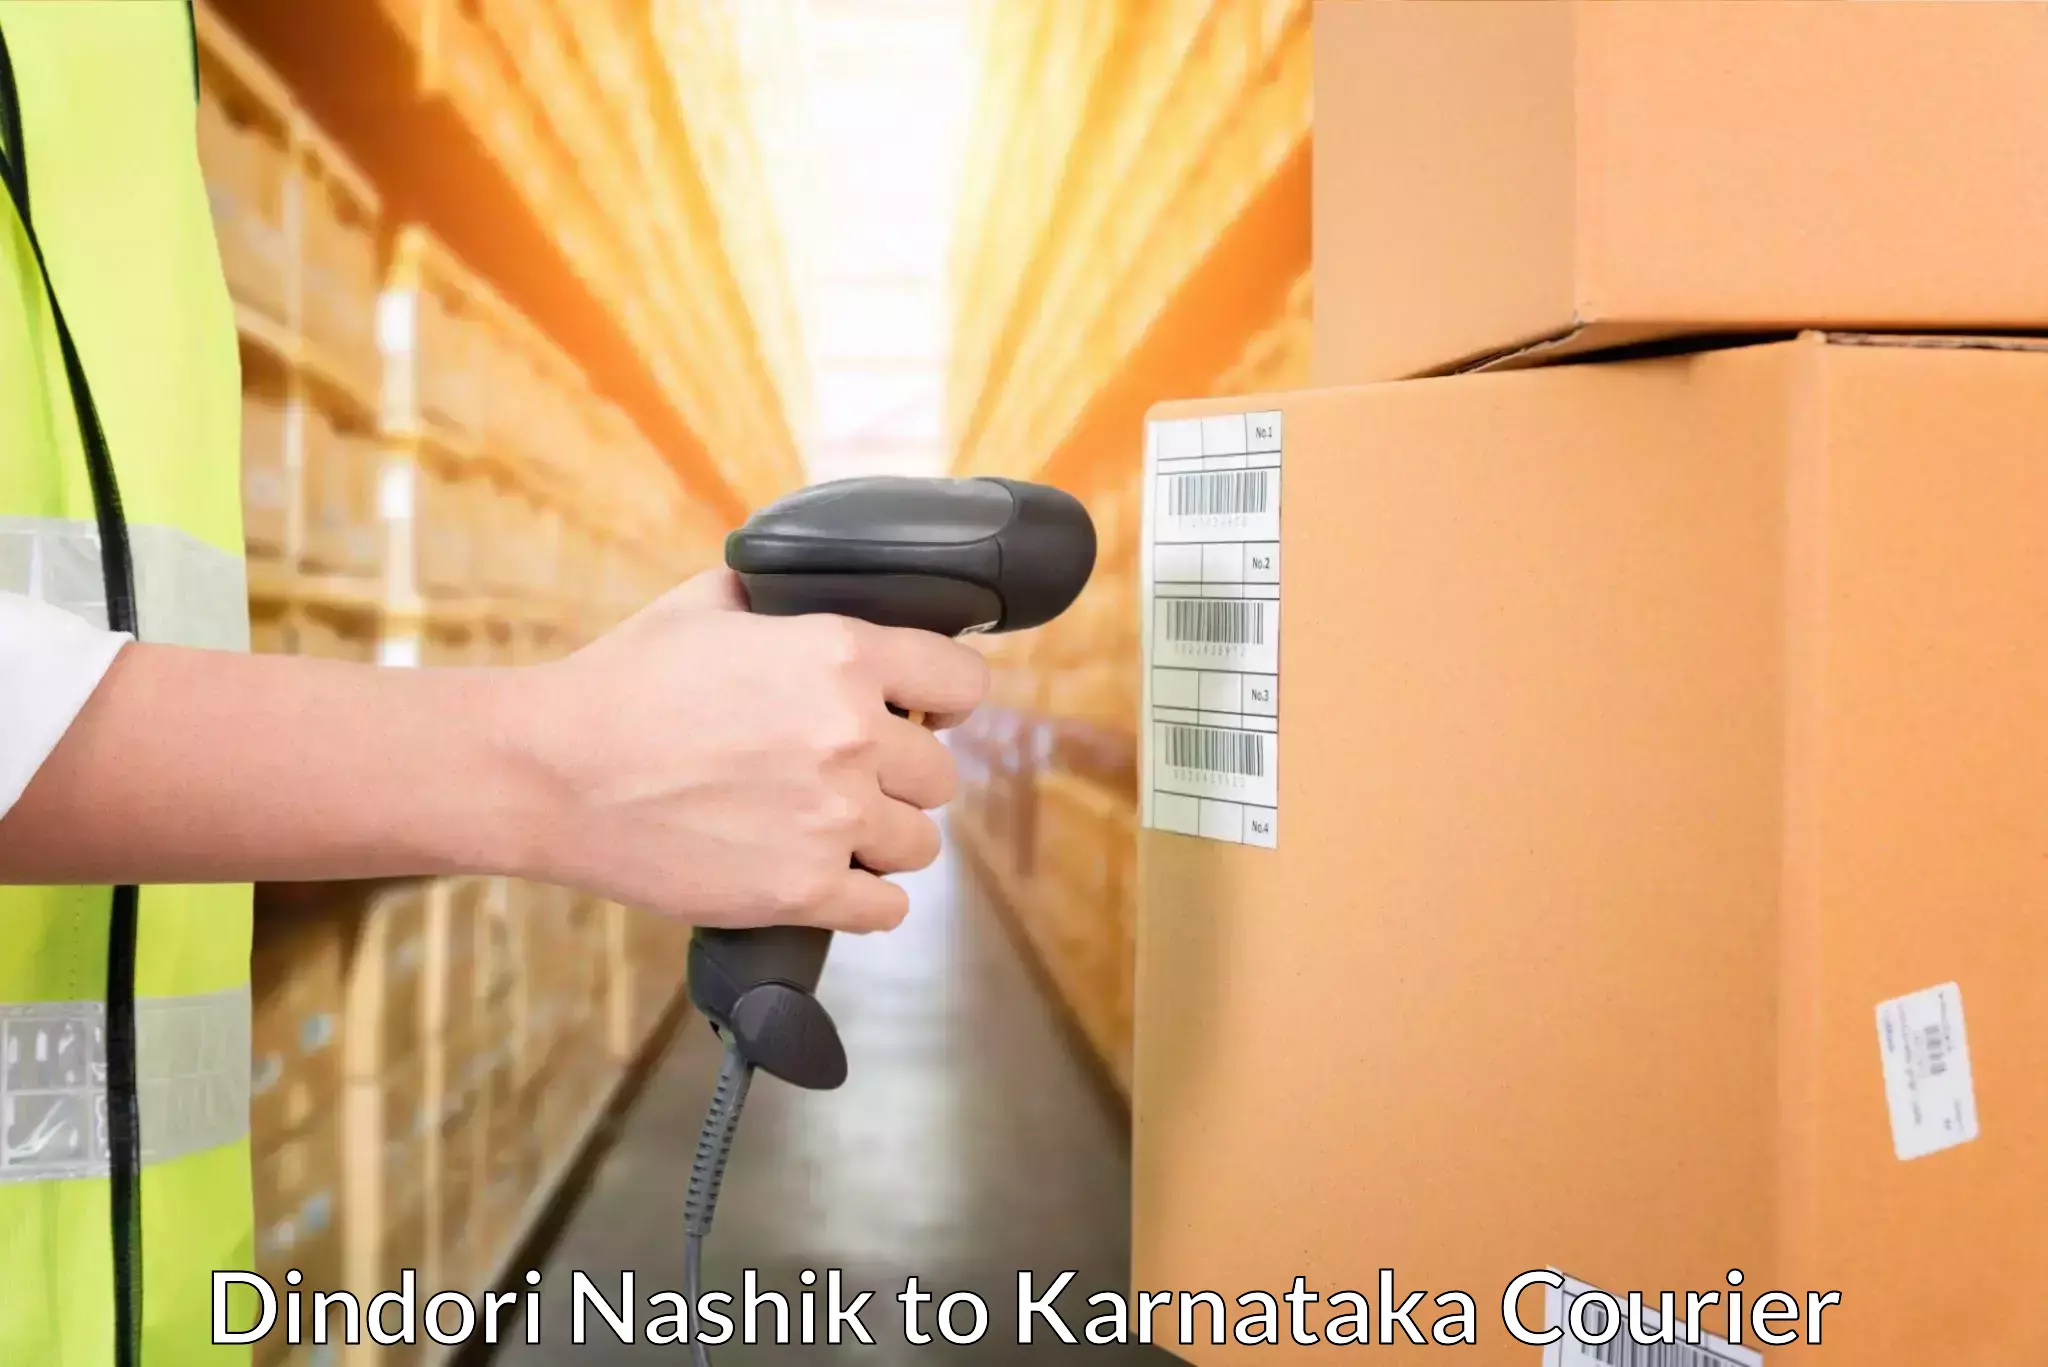 24/7 shipping services in Dindori Nashik to Indian Institute of Science Bangalore